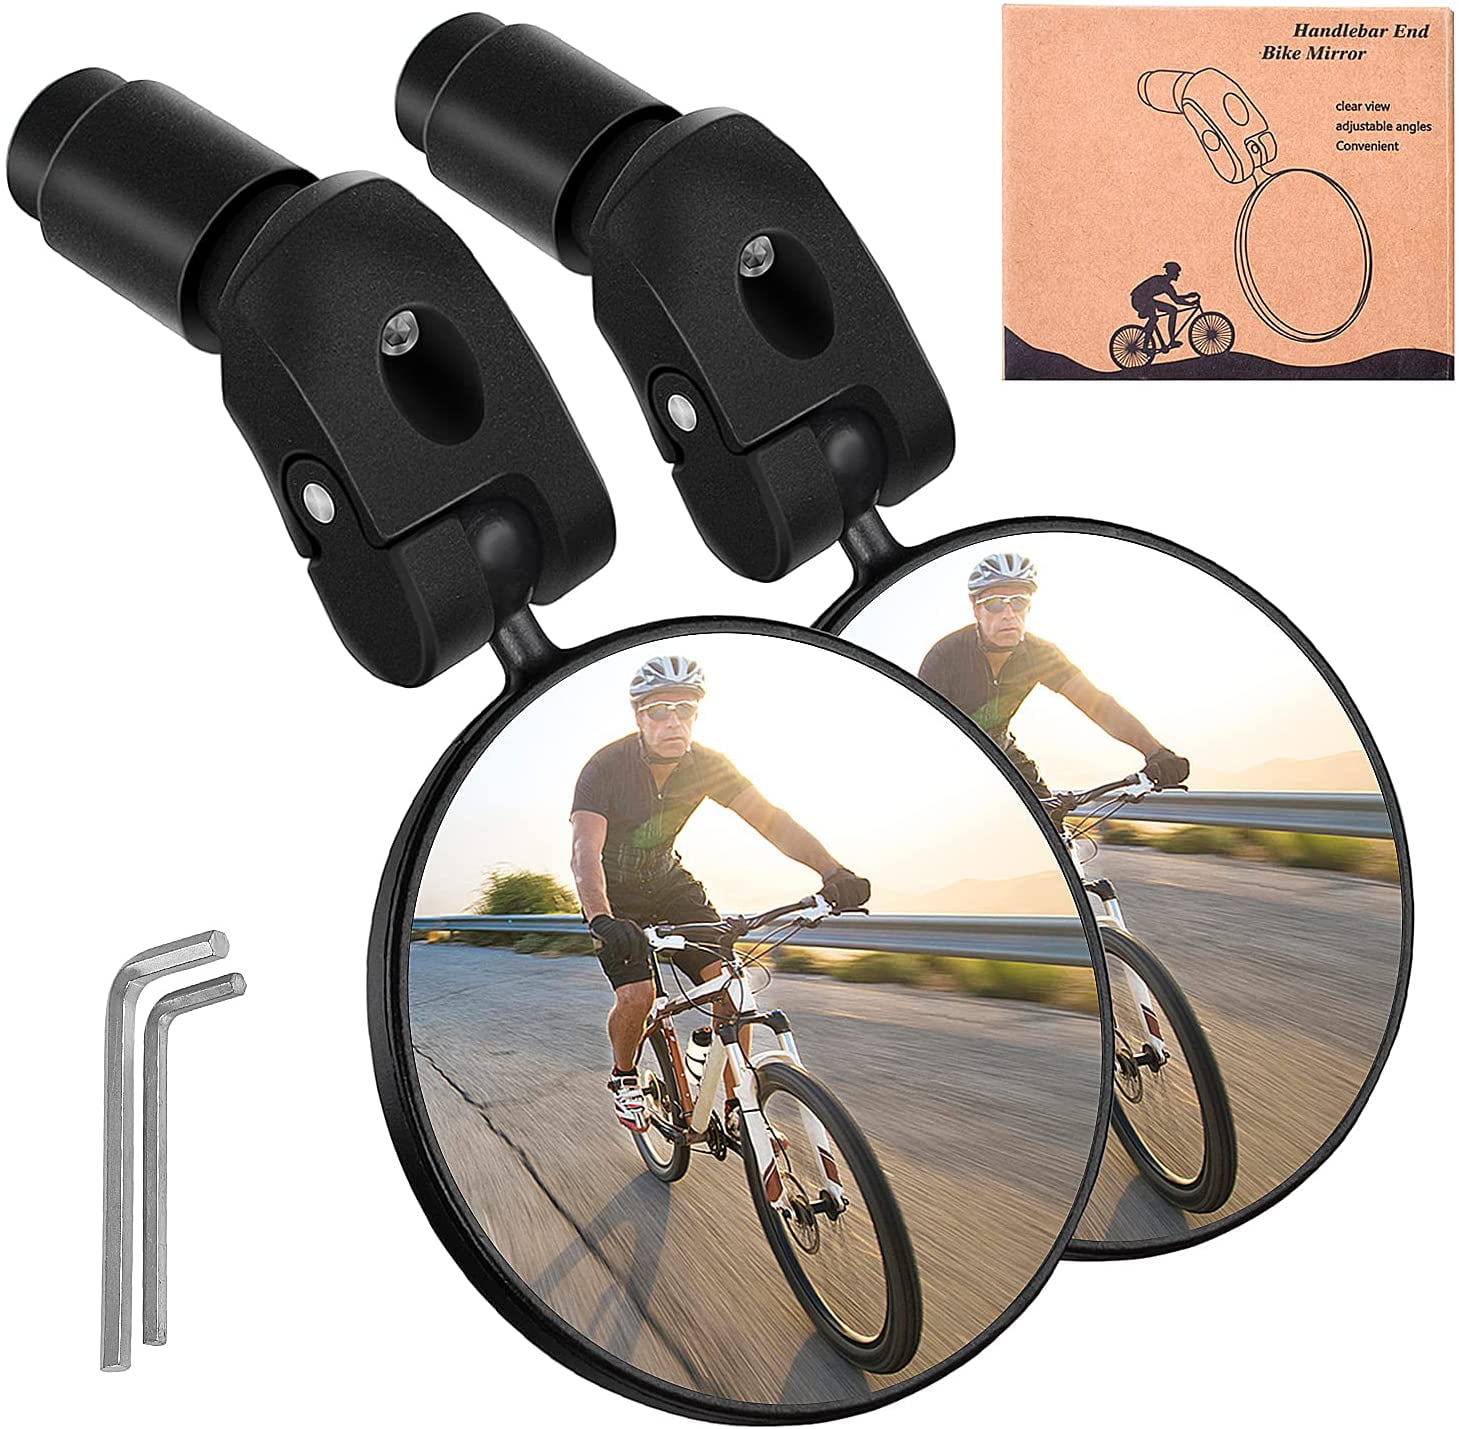 Bike Mirrors 1 piece 360°Rotation HD Plastic Convex Rearview Mirror Fits Handlebar of Hole Inside Within 17.4~22mm,Universal for Mountain Road Bike,Cycling,Ebike Bicycle 